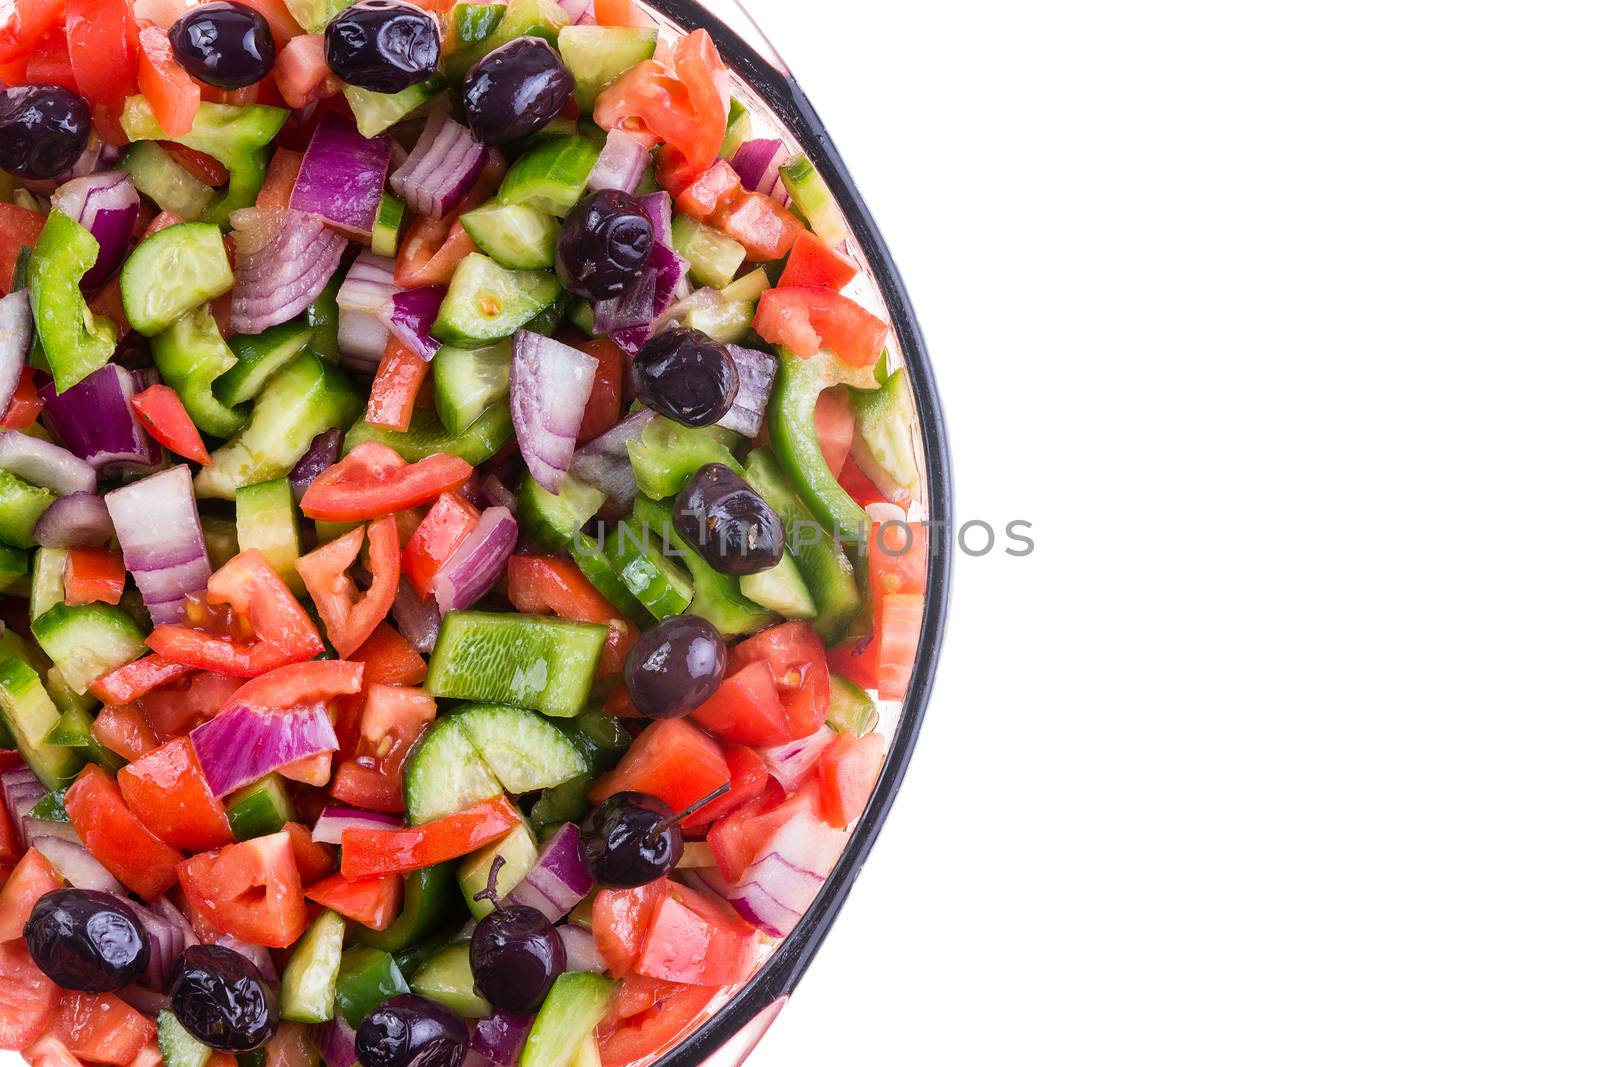 Colorful Turkish shepherd salad in a bowl by coskun